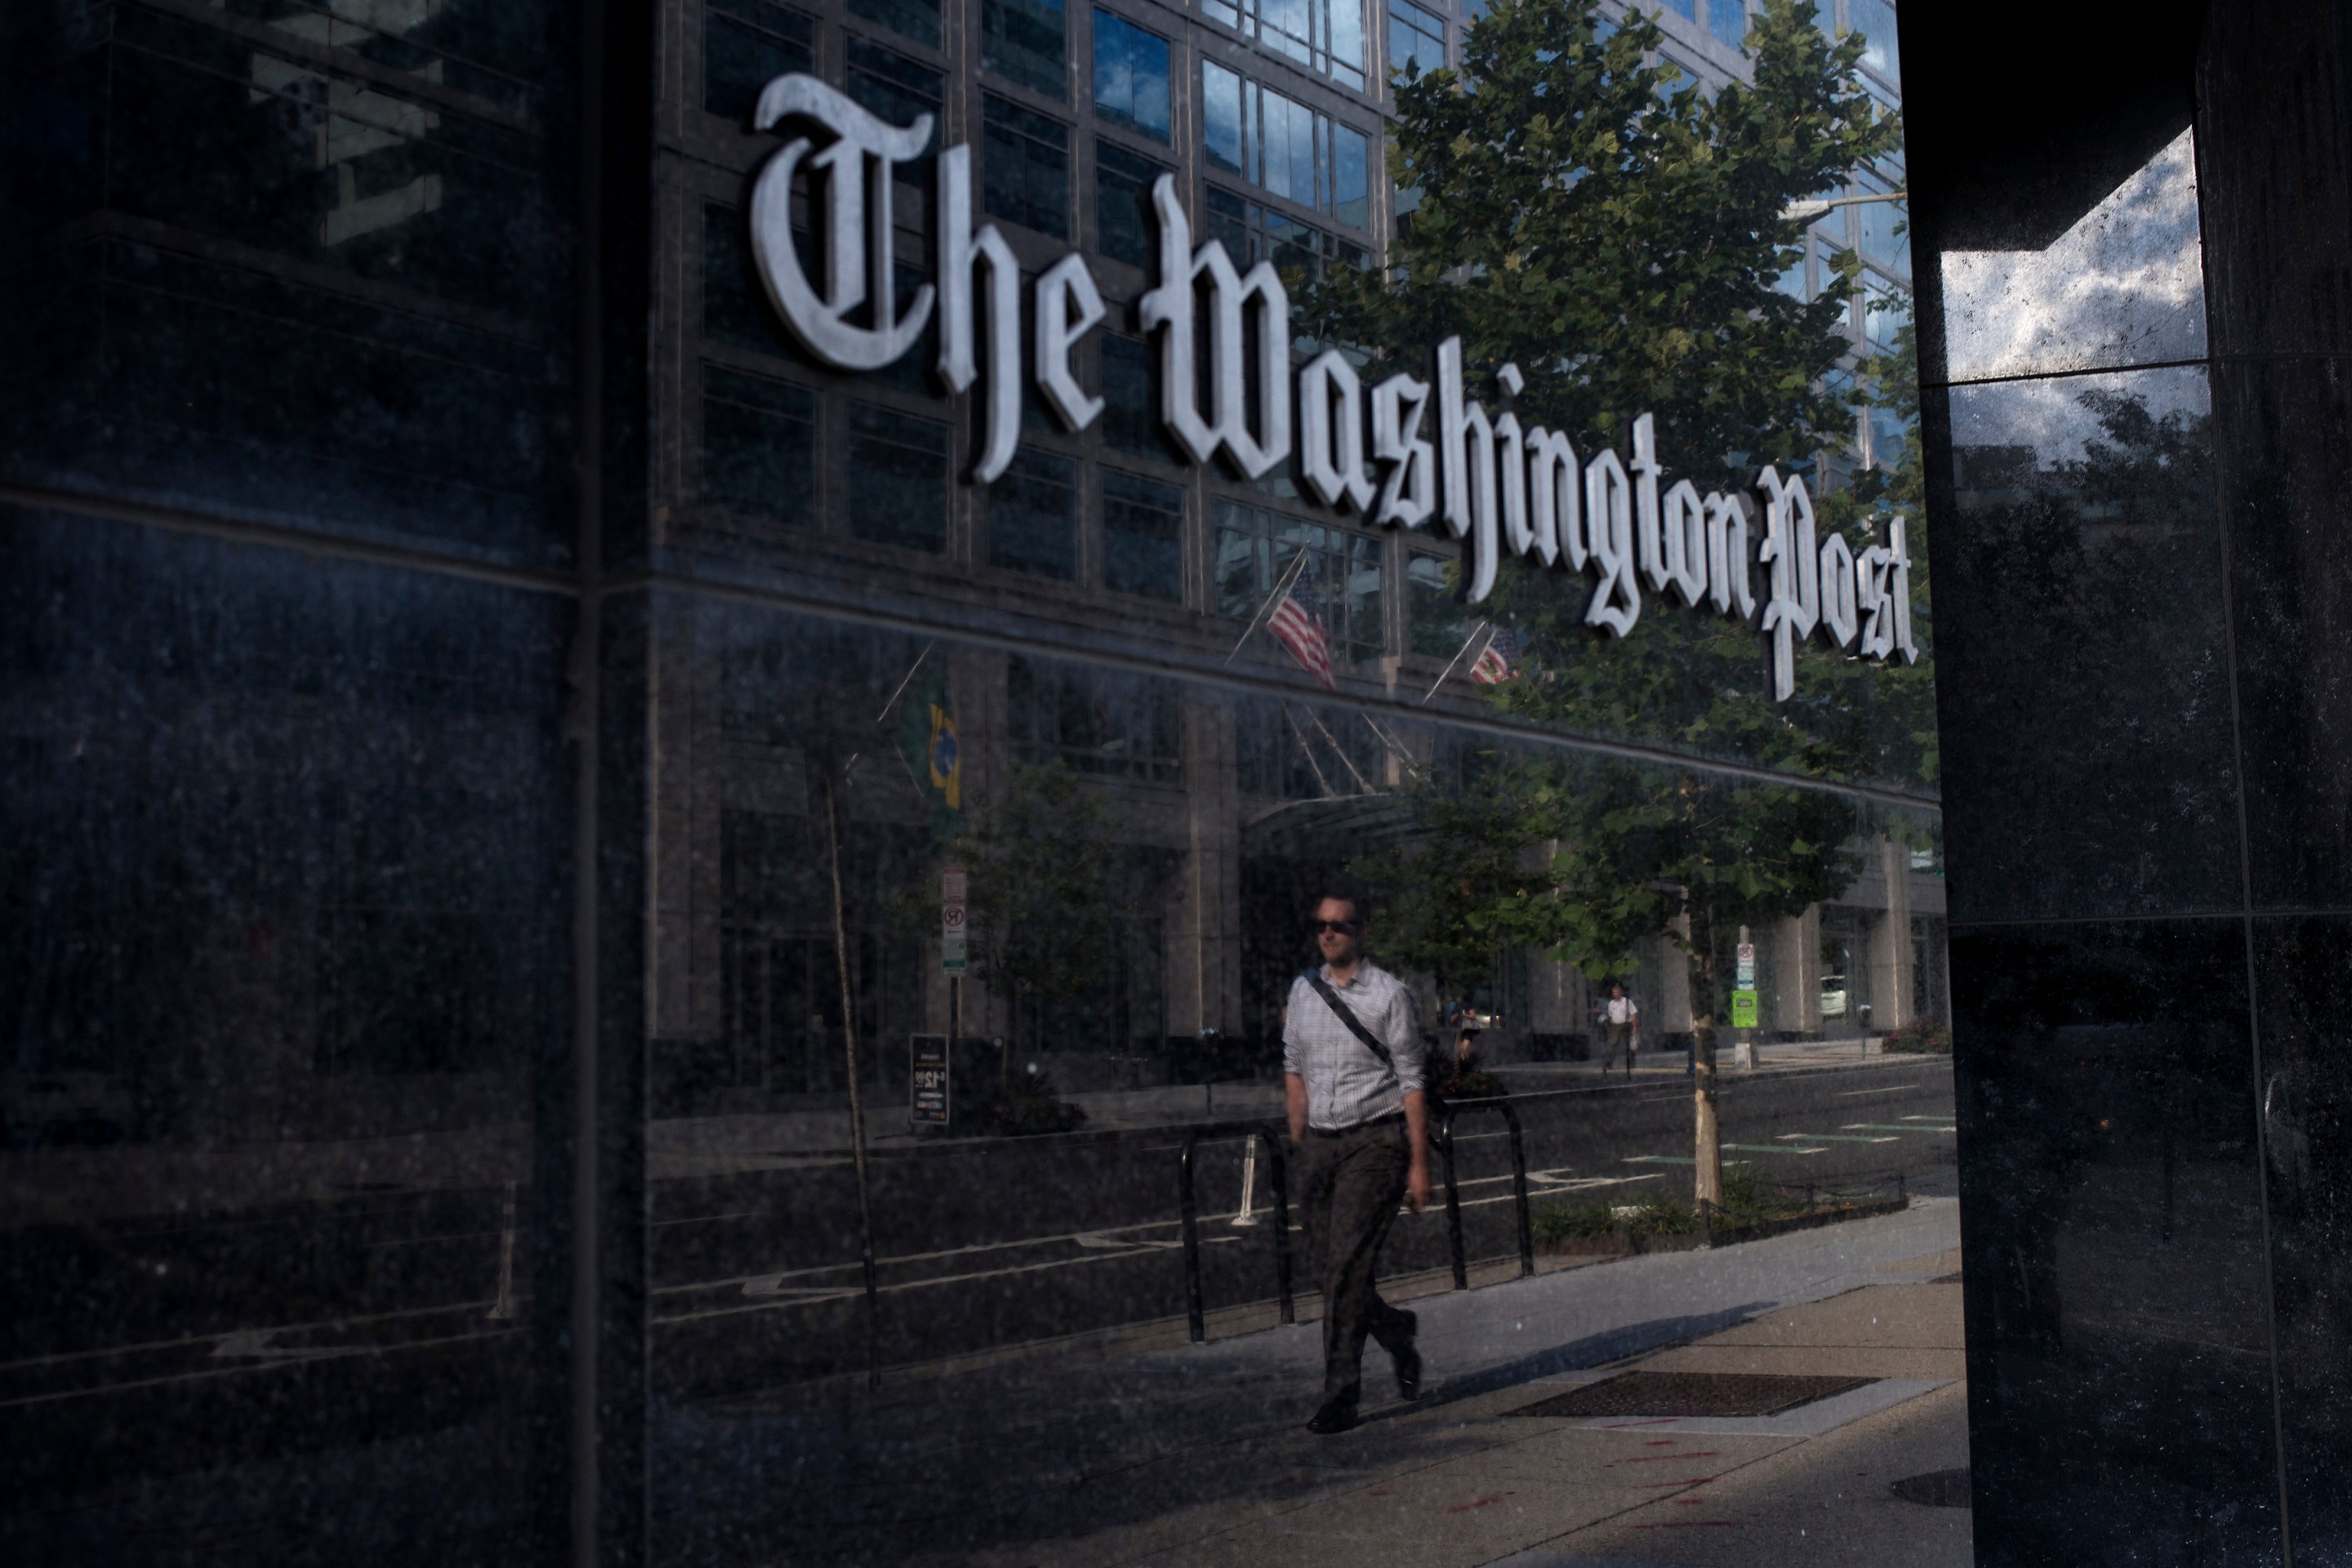 A man walks past The Washington Post on August 5, 2013 in Washington, DC after it was announced that Amazon.com founder and CEO Jeff Bezos had agreed to purchase the Post for USD 250 million. Multi-billionaire Bezos, who created Amazon, which has soared in a few years to a dominant position in online retailing, said he was buying the Post in his personal capacity and hoped to shepherd it through the evolution away from traditional newsprint.